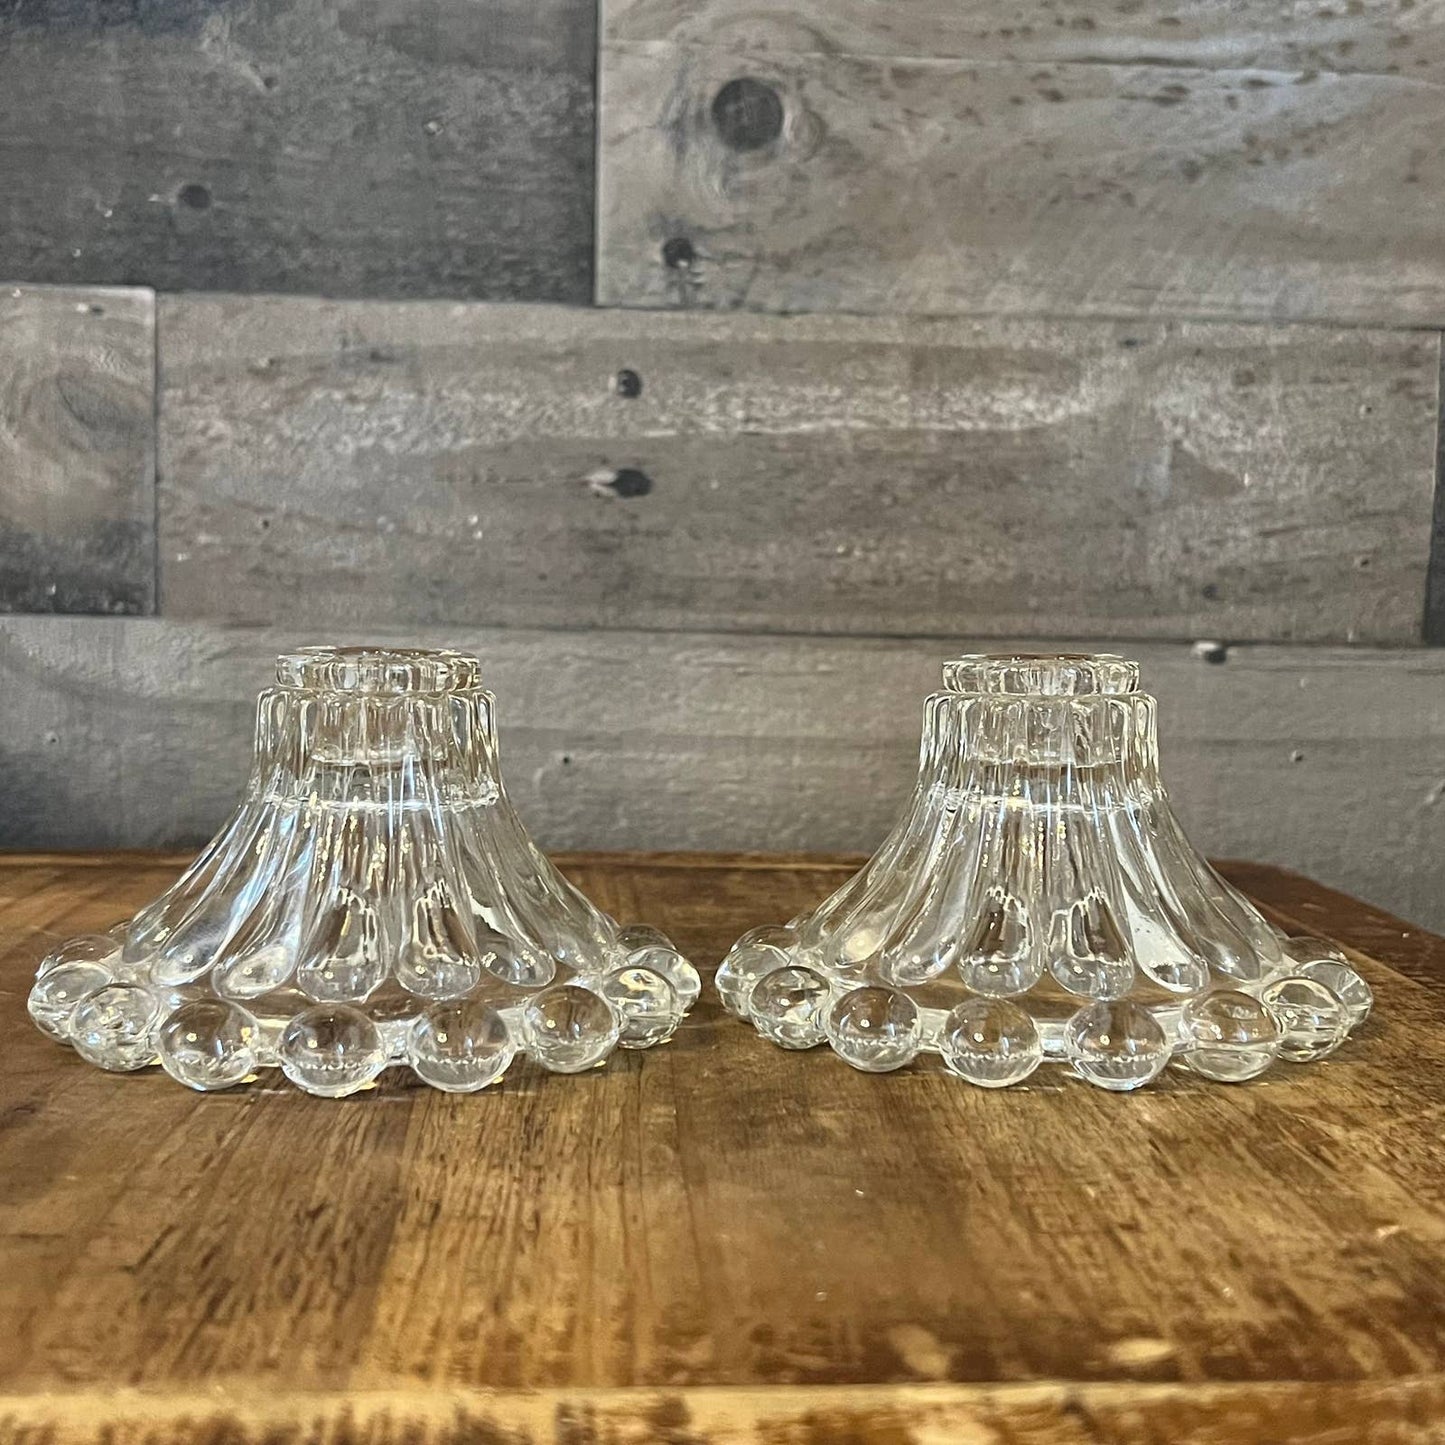 Anchor Hocking clear glass bubble rim candlestick holder pair